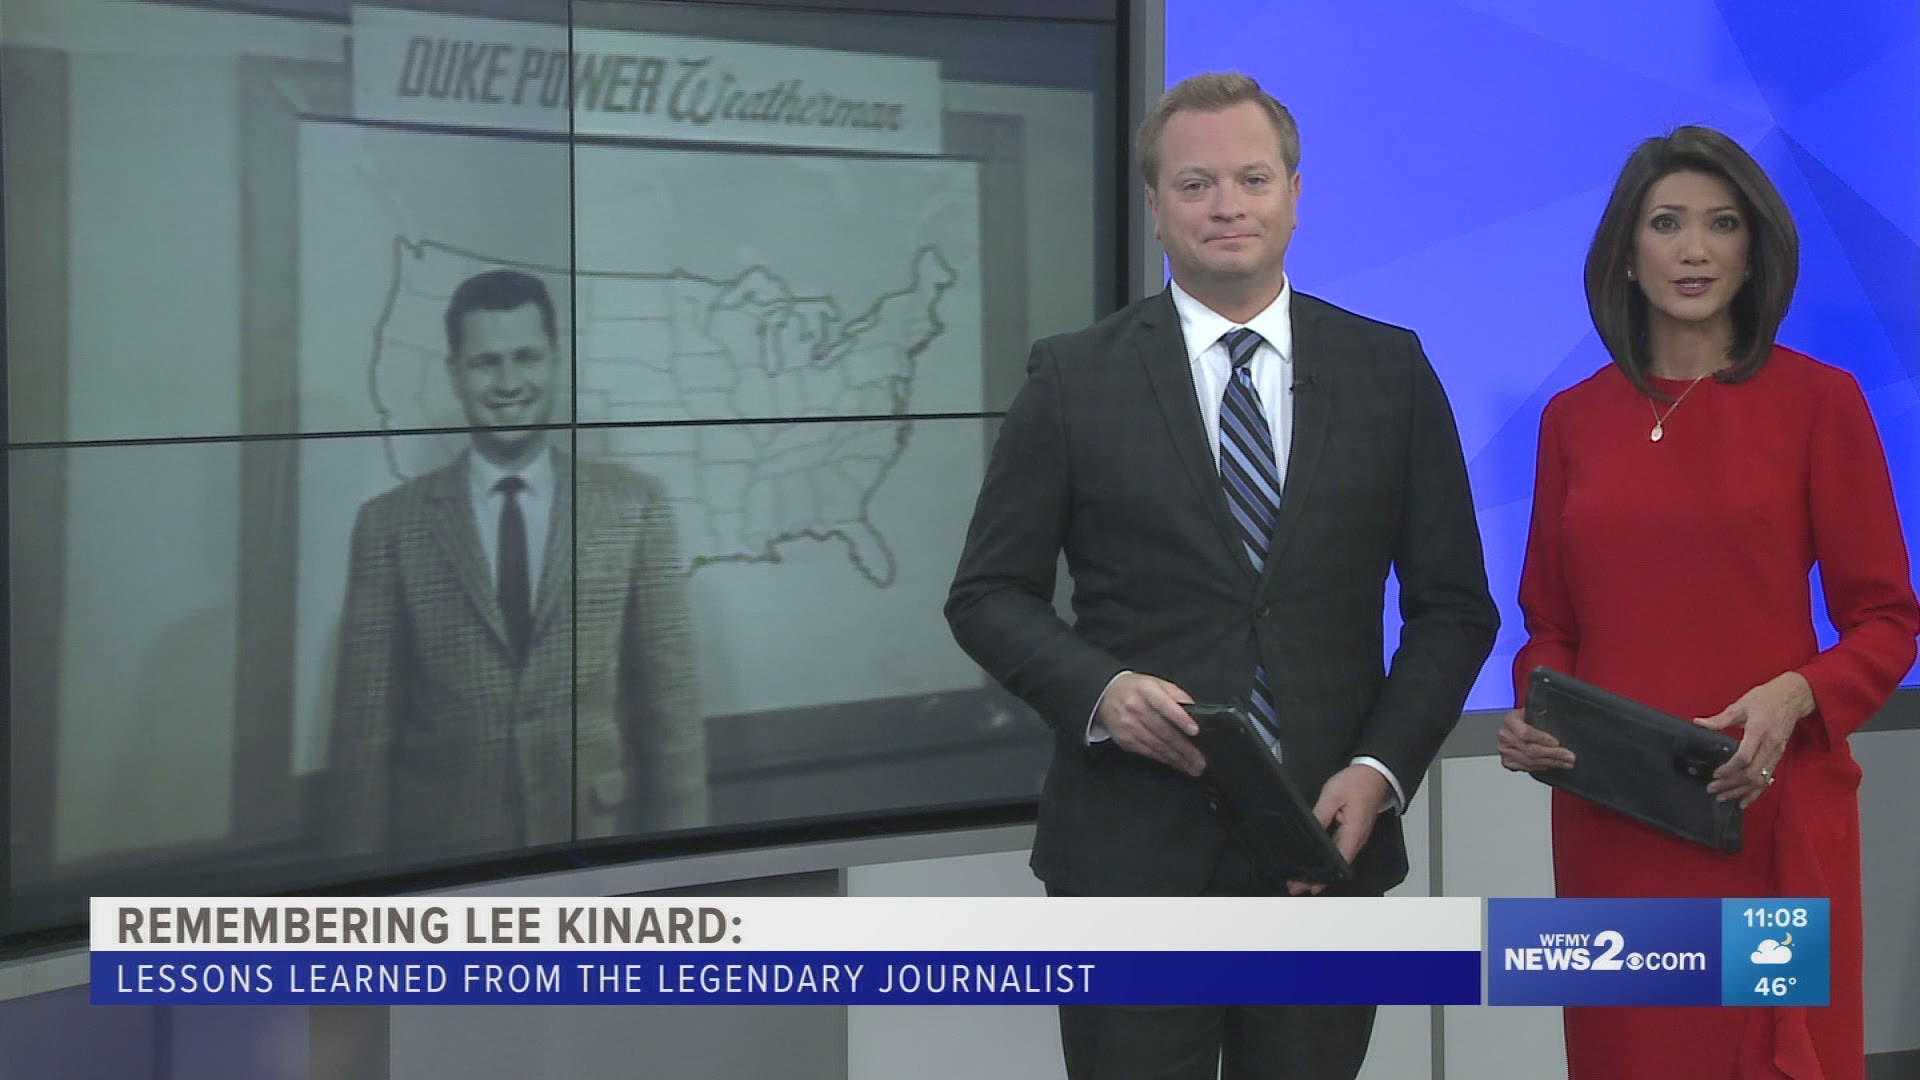 We talked to journalists who learned from Lee Kinard's leadership during his tenure at WFMY News 2.